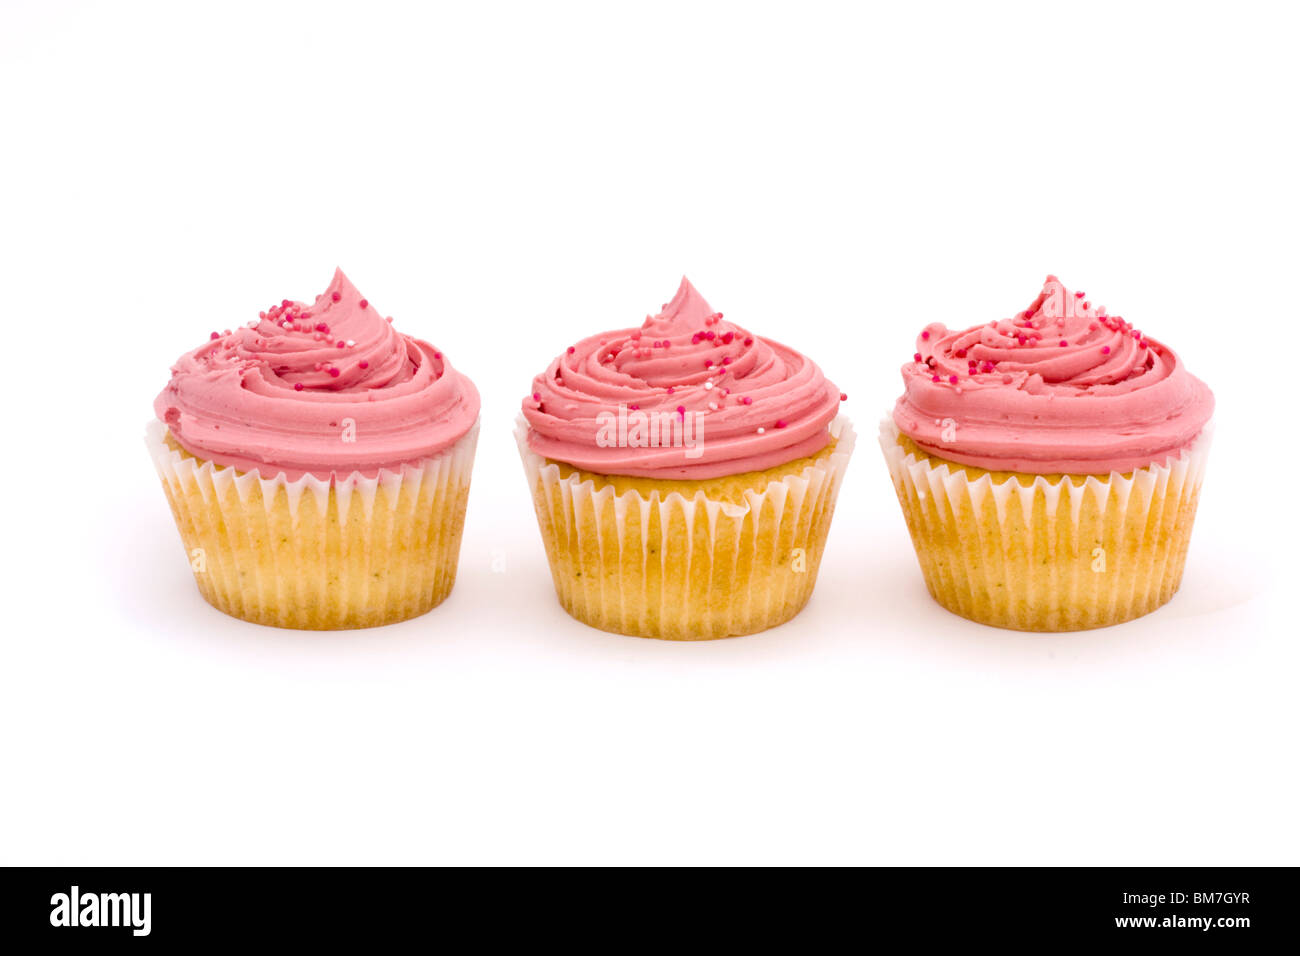 three pink cup cakes on a white background Stock Photo